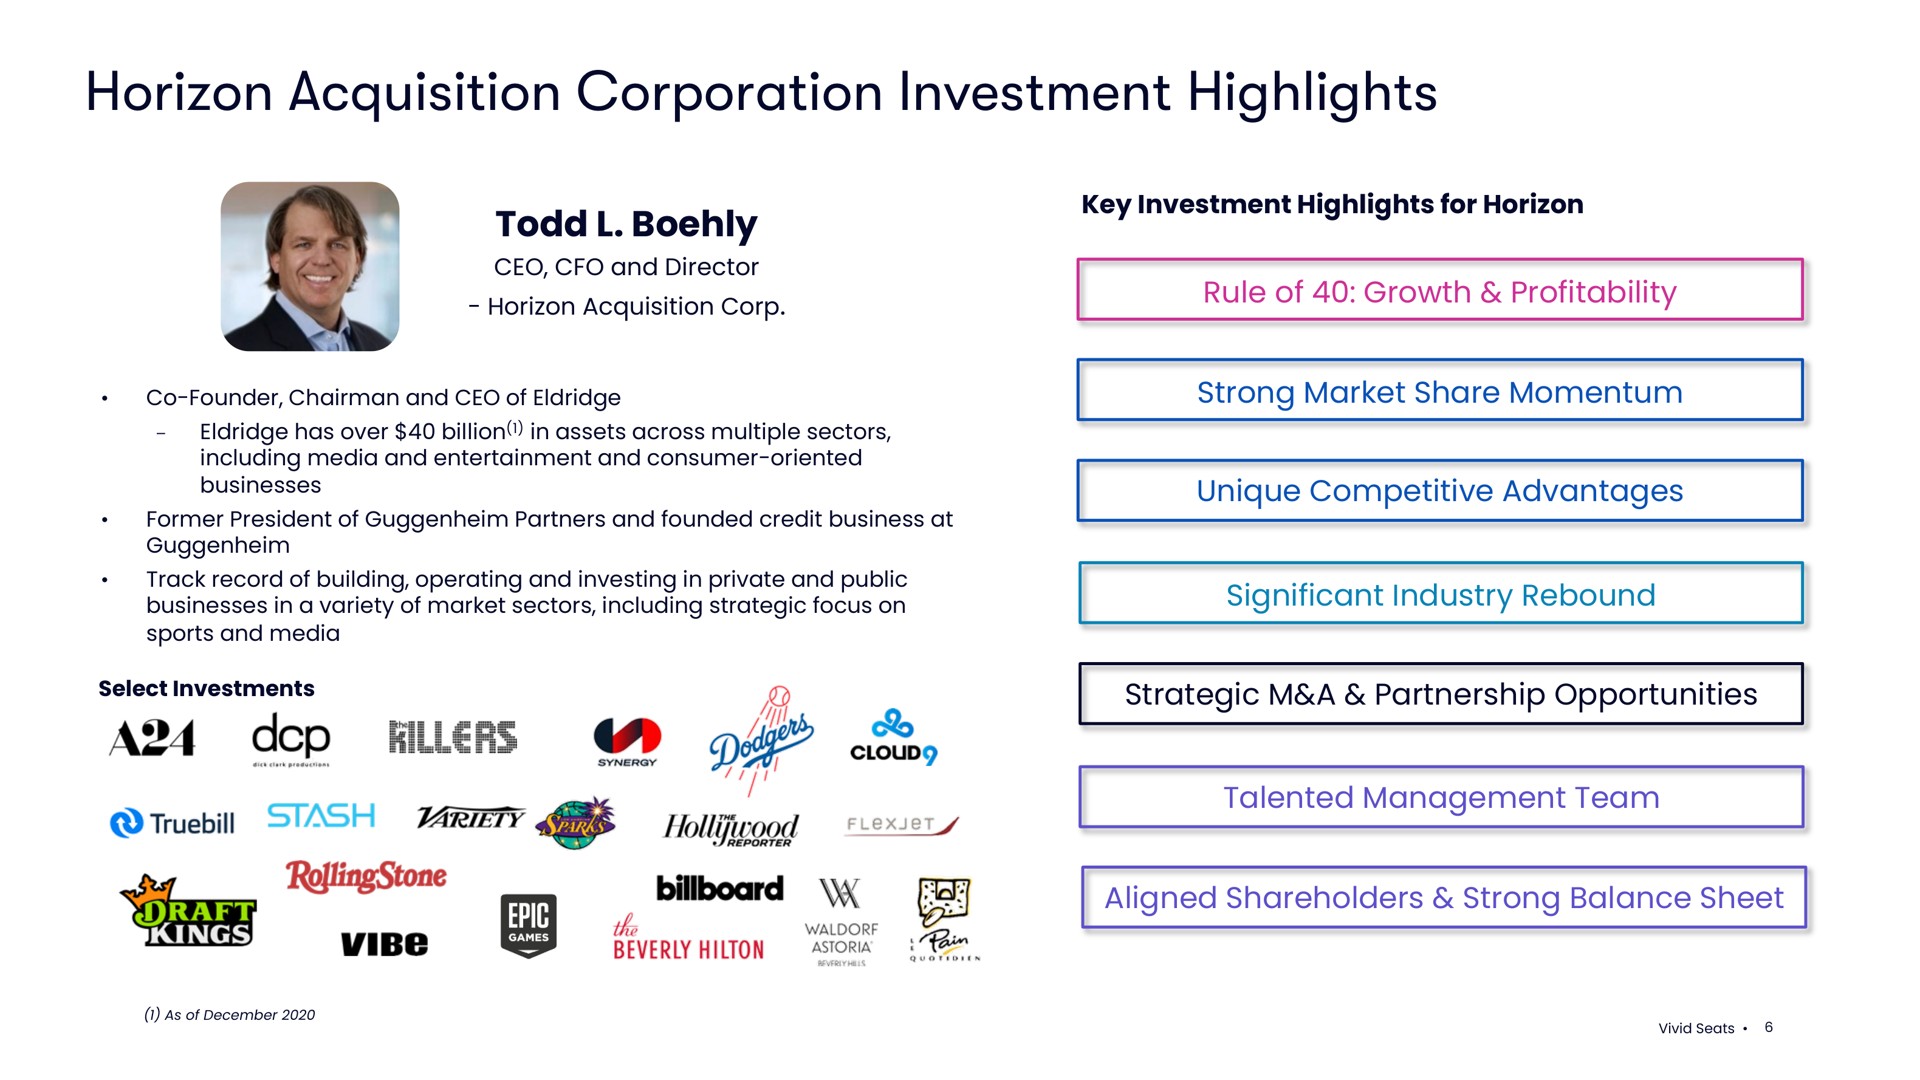 horizon acquisition corporation investment highlights ths by billboard | Vivid Seats